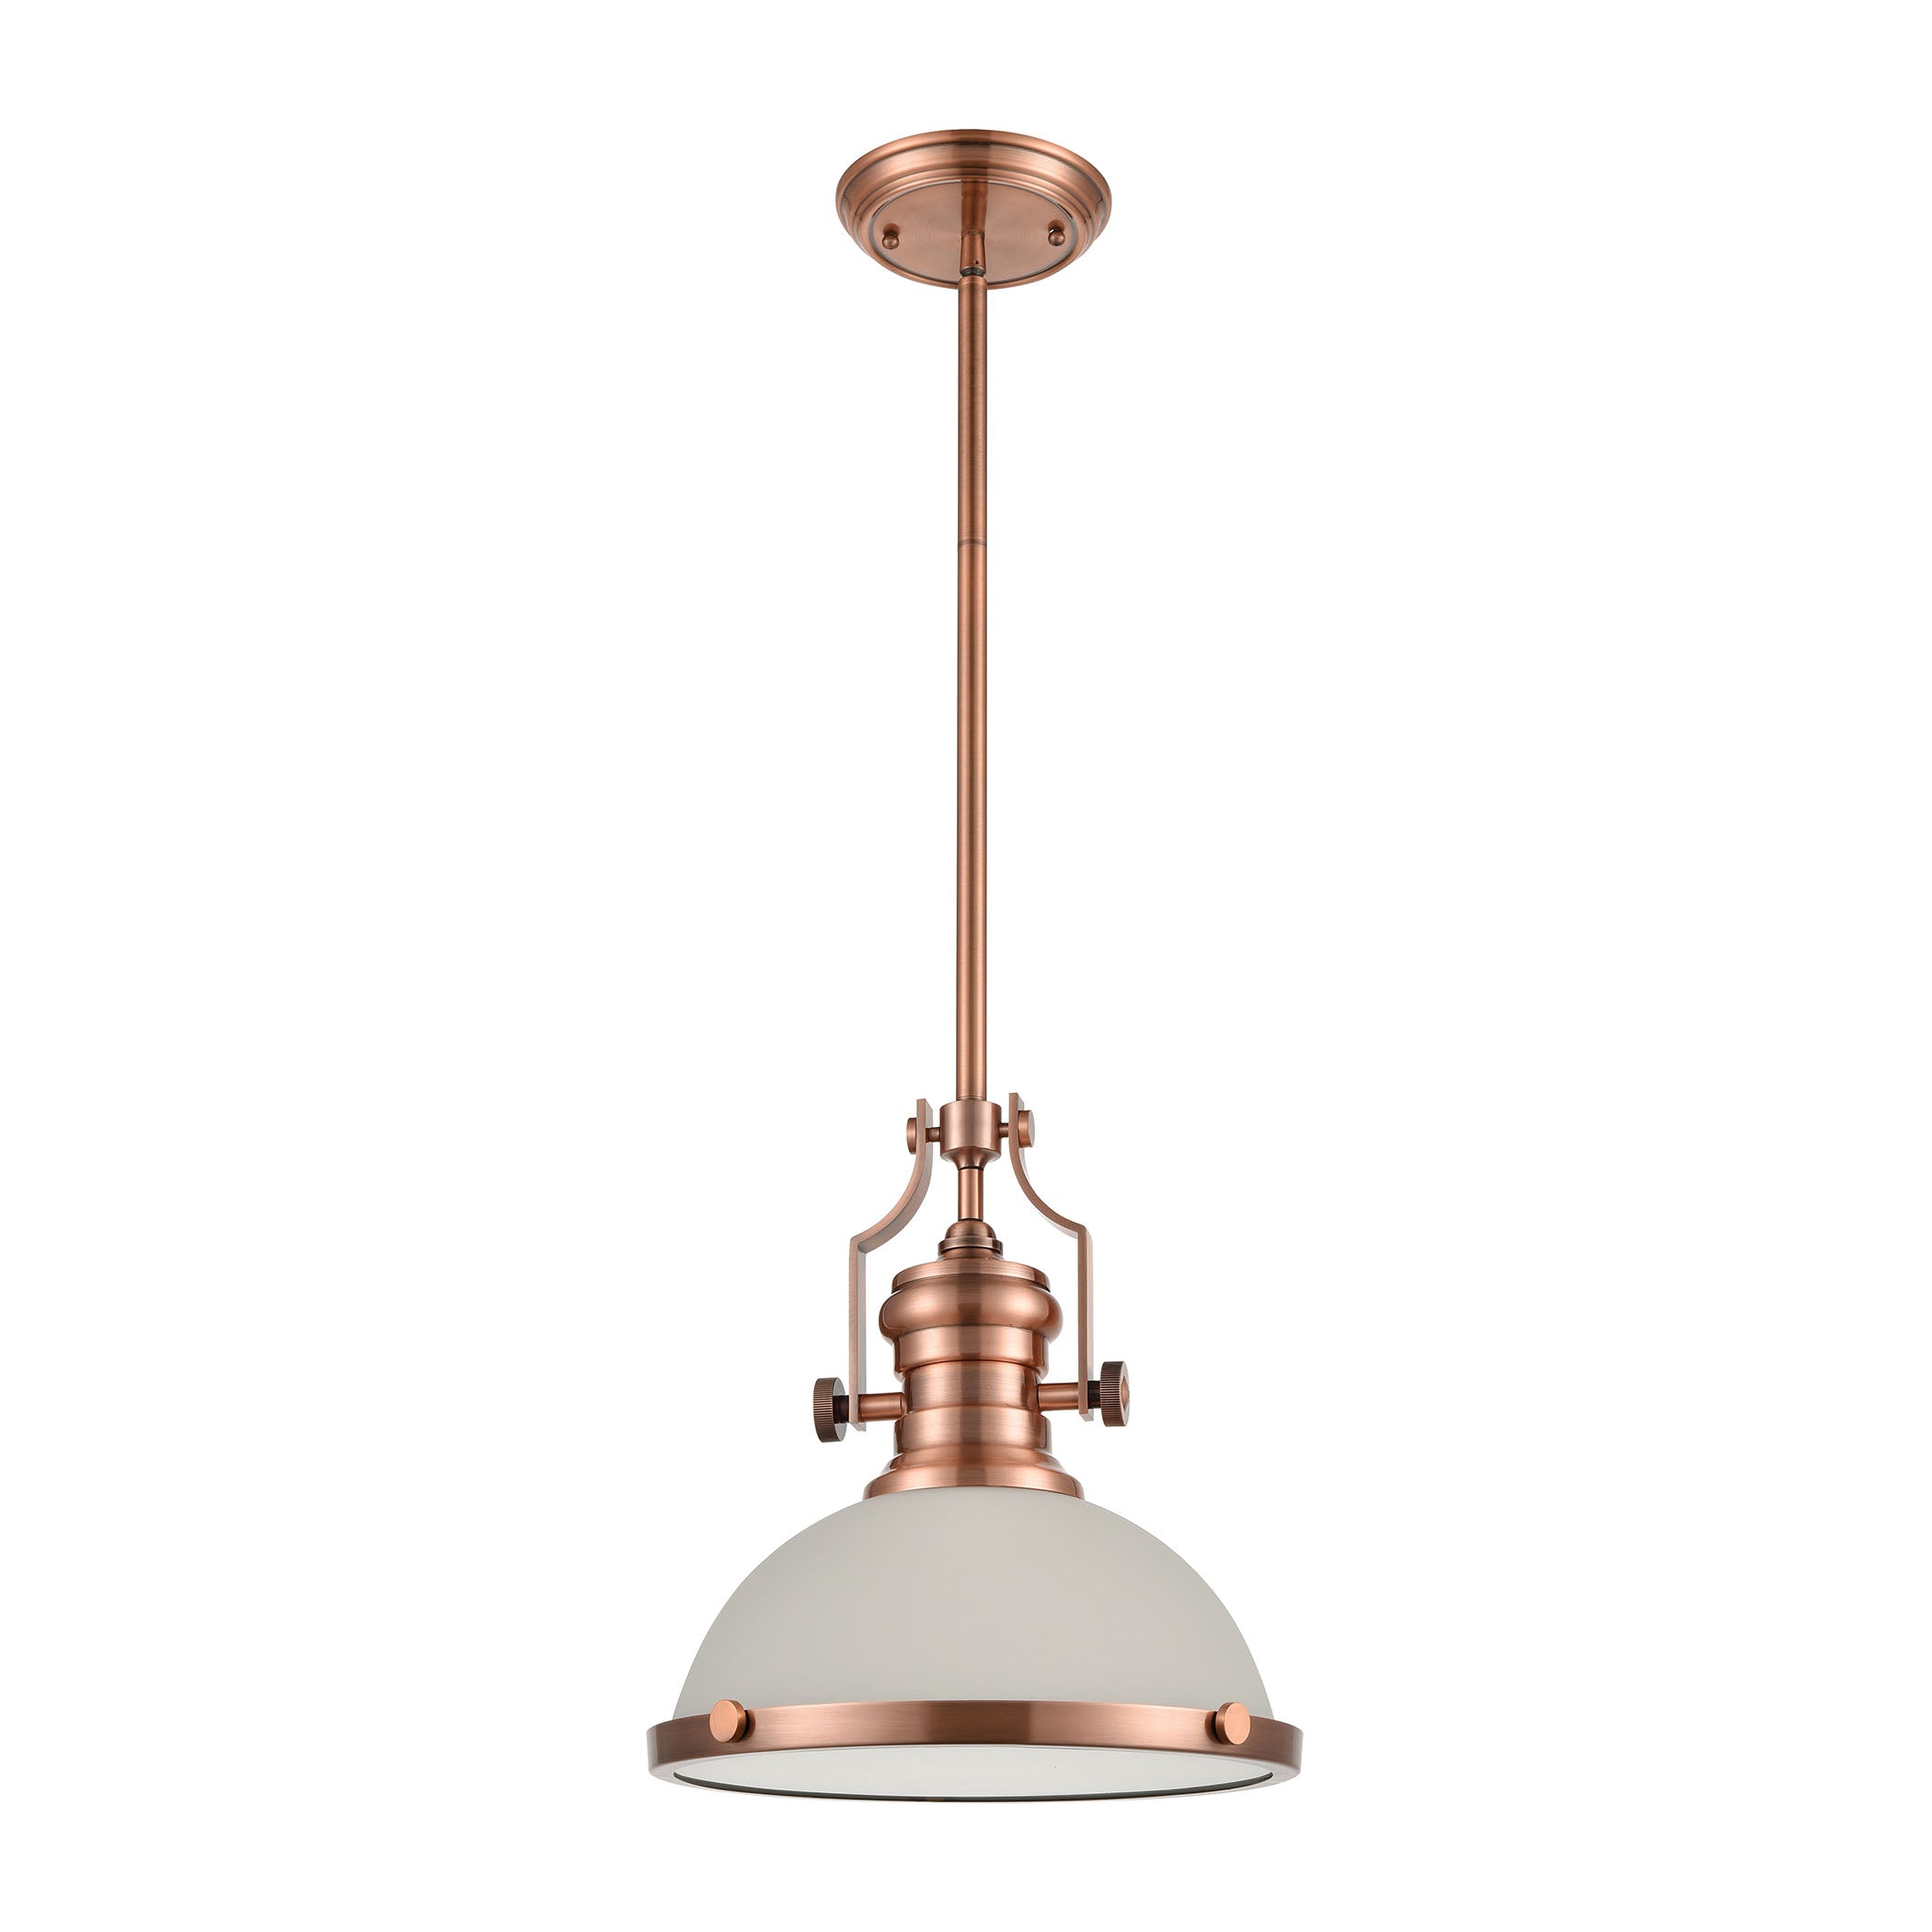 ELK Lighting 66143-1 Chadwick 1-Light Pendant in Antique Copper with White Glass